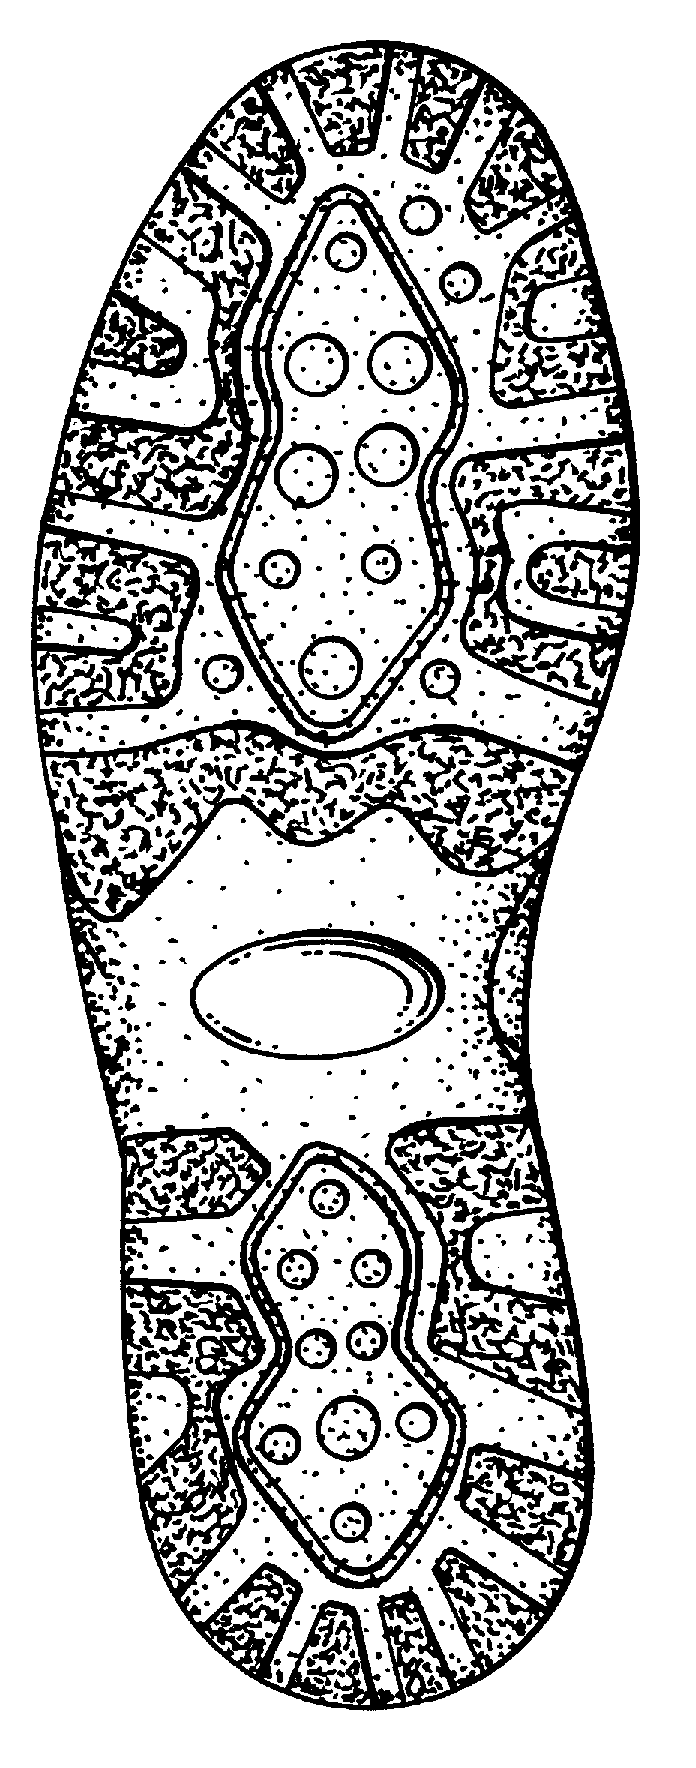 A typical example of a sole with a circular or oval elememt.
